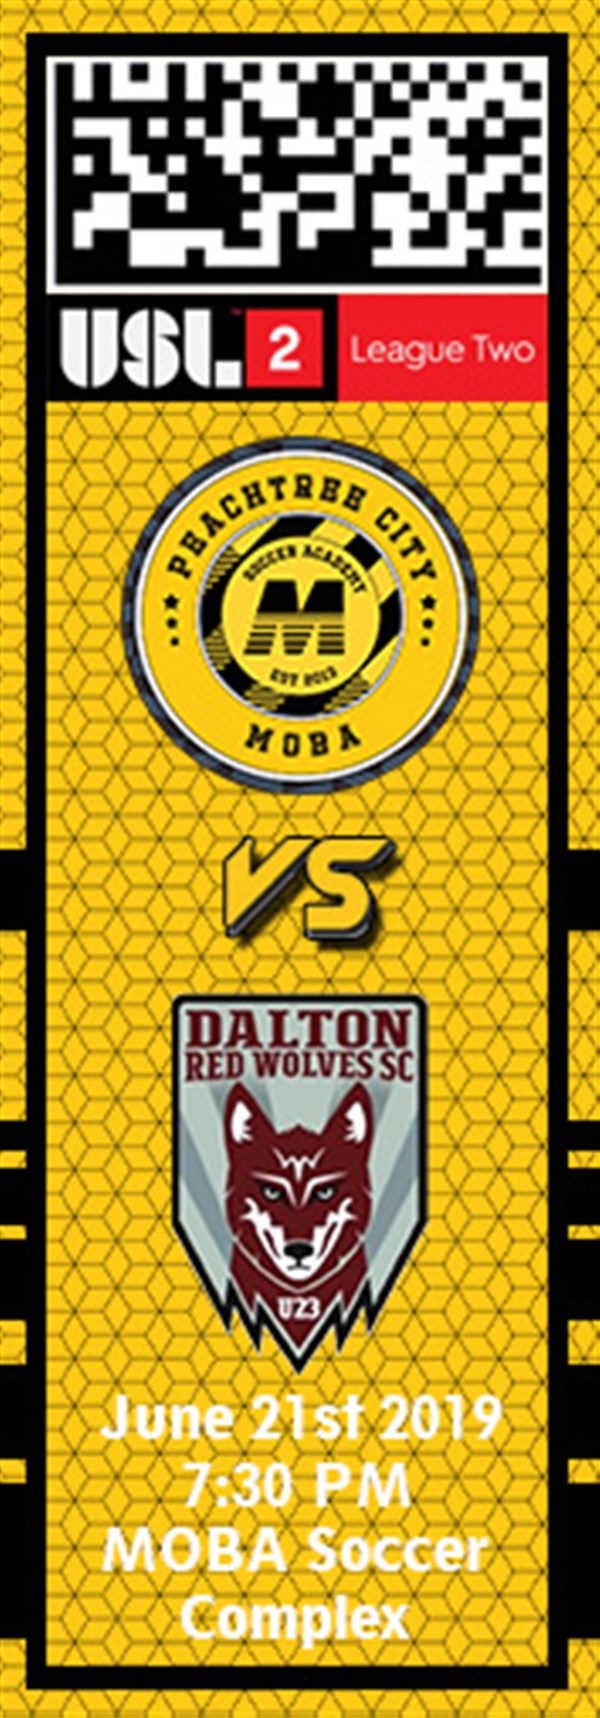 Get Information and buy tickets to PTC MOBA vs. Dalton Red Wolves USL2 on MOBA Soccer Academy